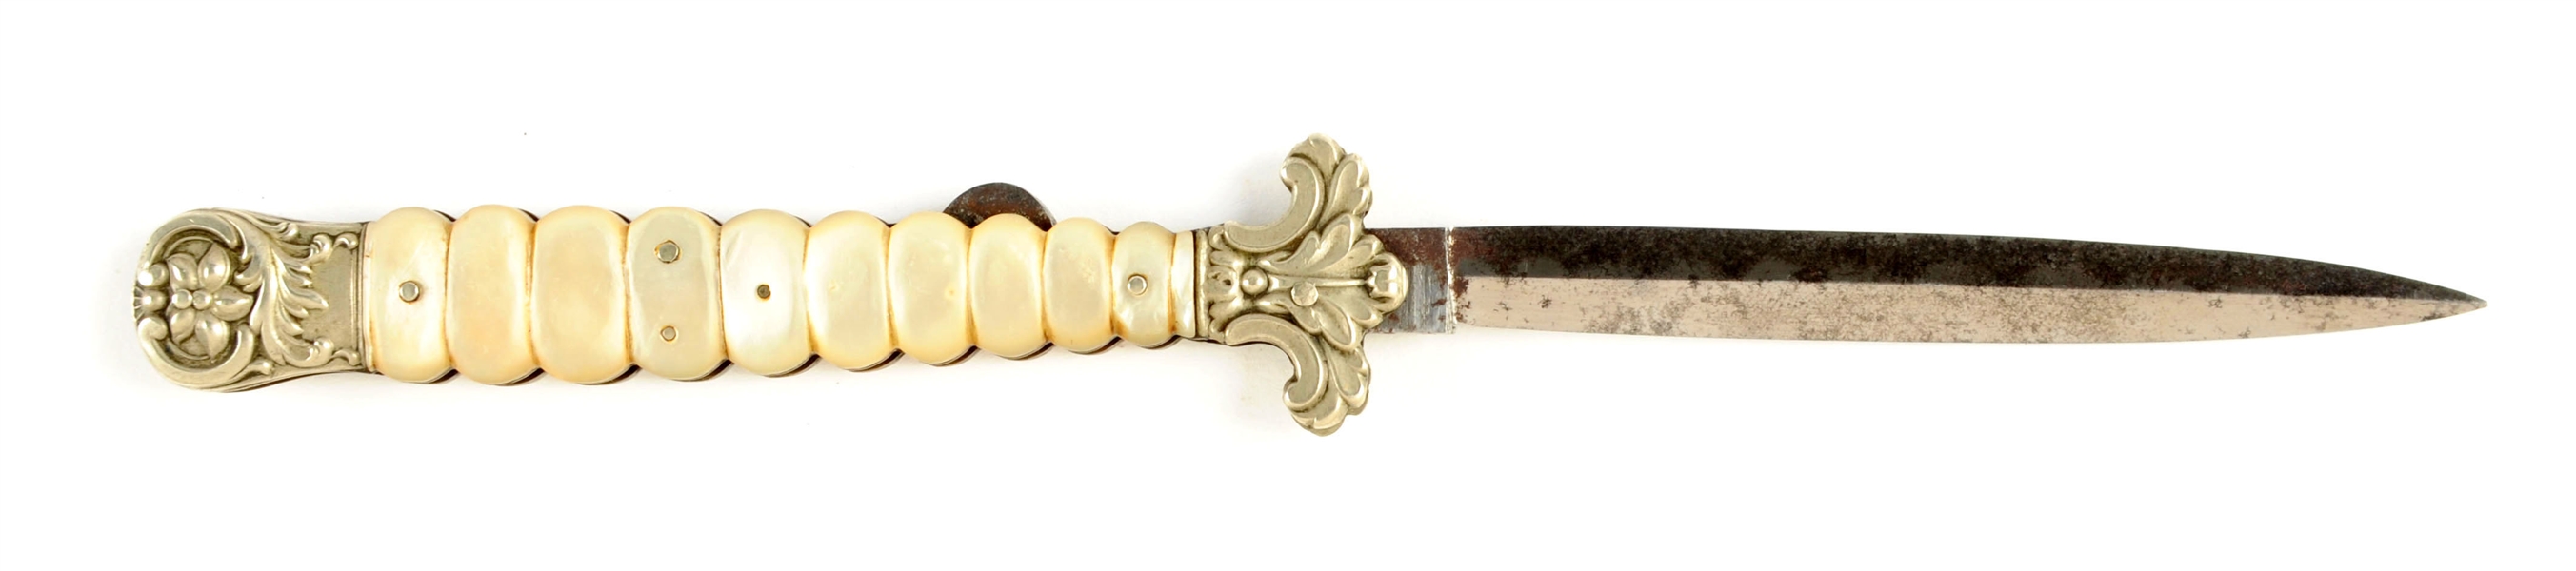 EARLY CARVED MOTHER-OF-PEARL FOLDING DIRK KNIFE, ATTRIBUTED TO JOHN BROWN & CO., SHEFFIELD.